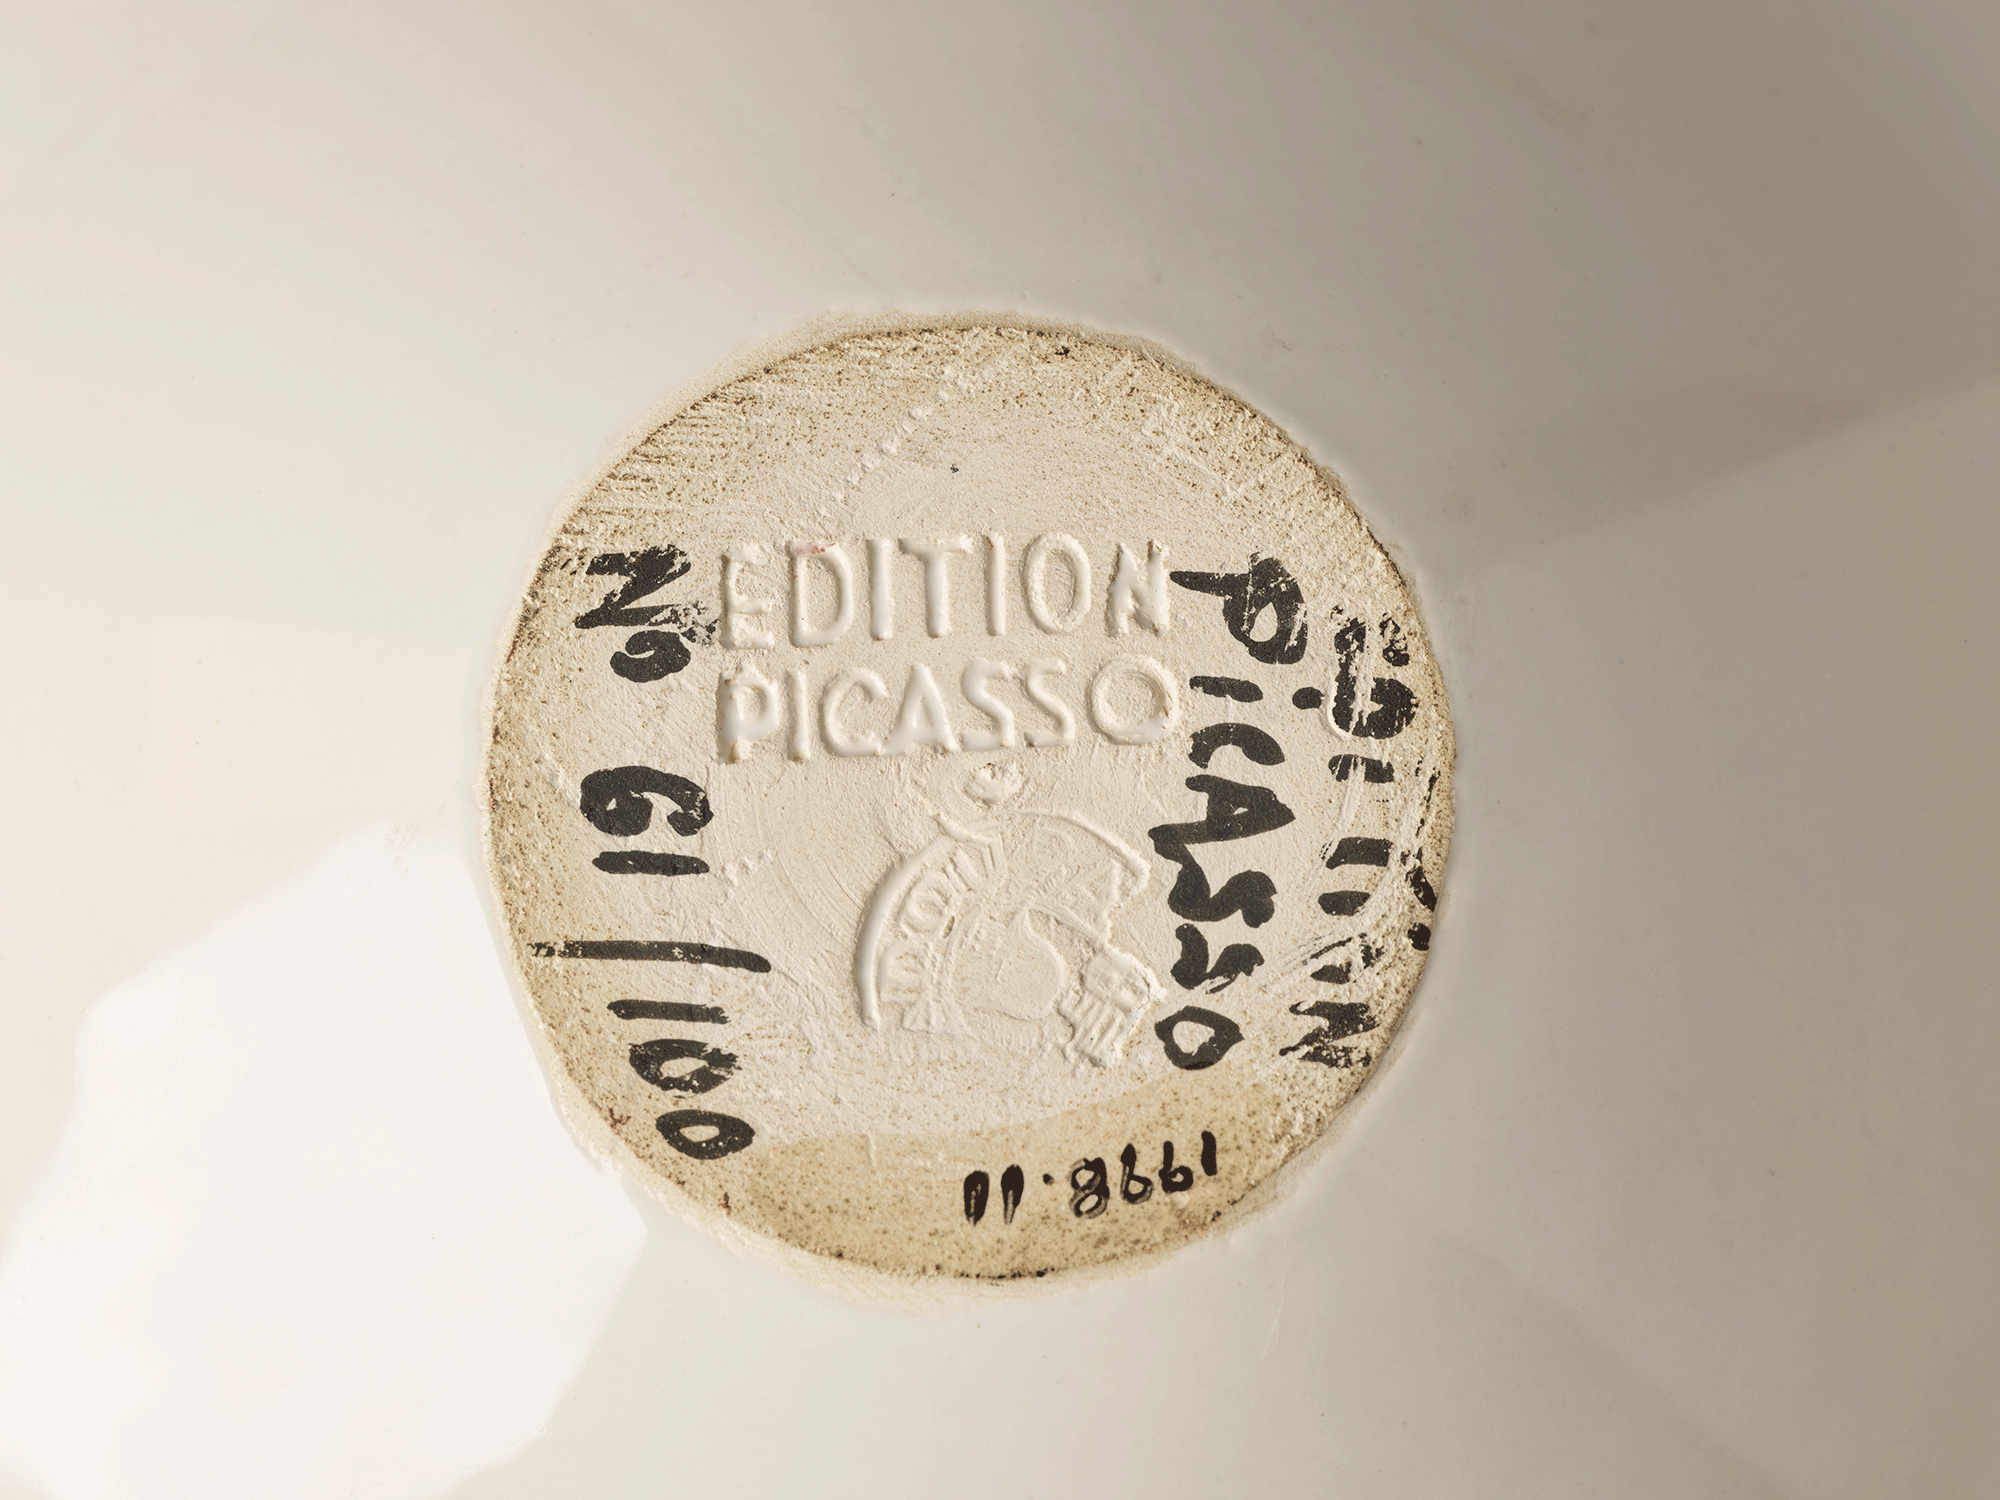 Underside of bowl. Words stamped into clay read “Edition Picasso.” Words painted in black read “No 61/100 [,] Picasso Edition.” Accession number is visible.